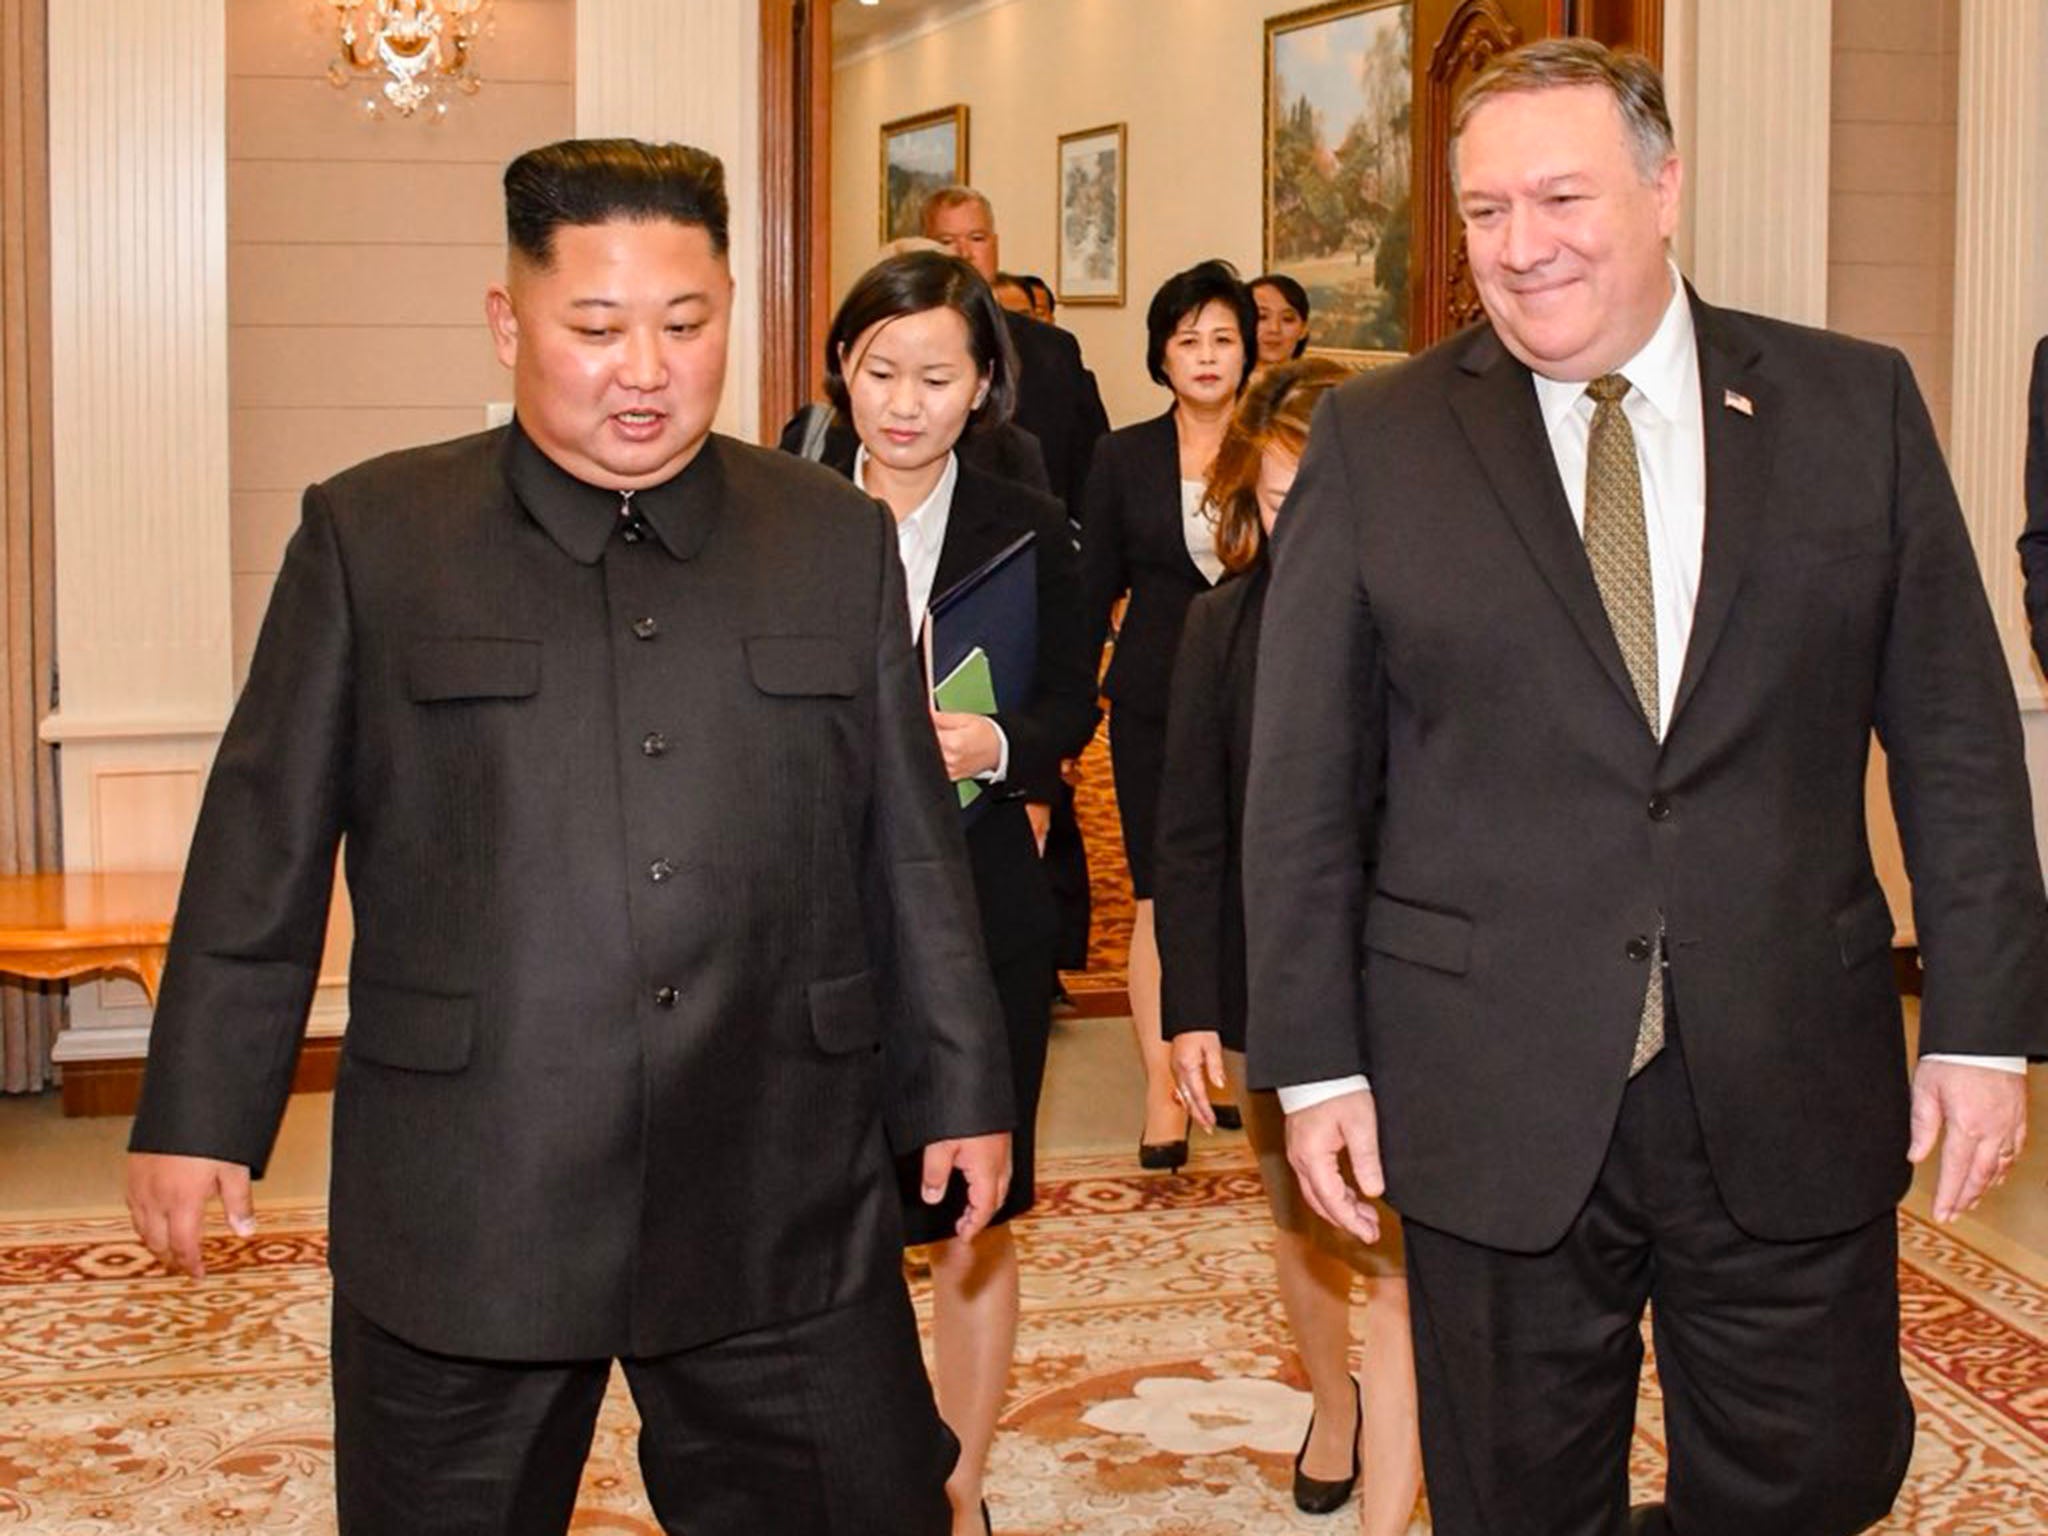 Mr Pompeo posted a photo on Twitter of himself walking along with Mr Kim during the Pyongyang visit